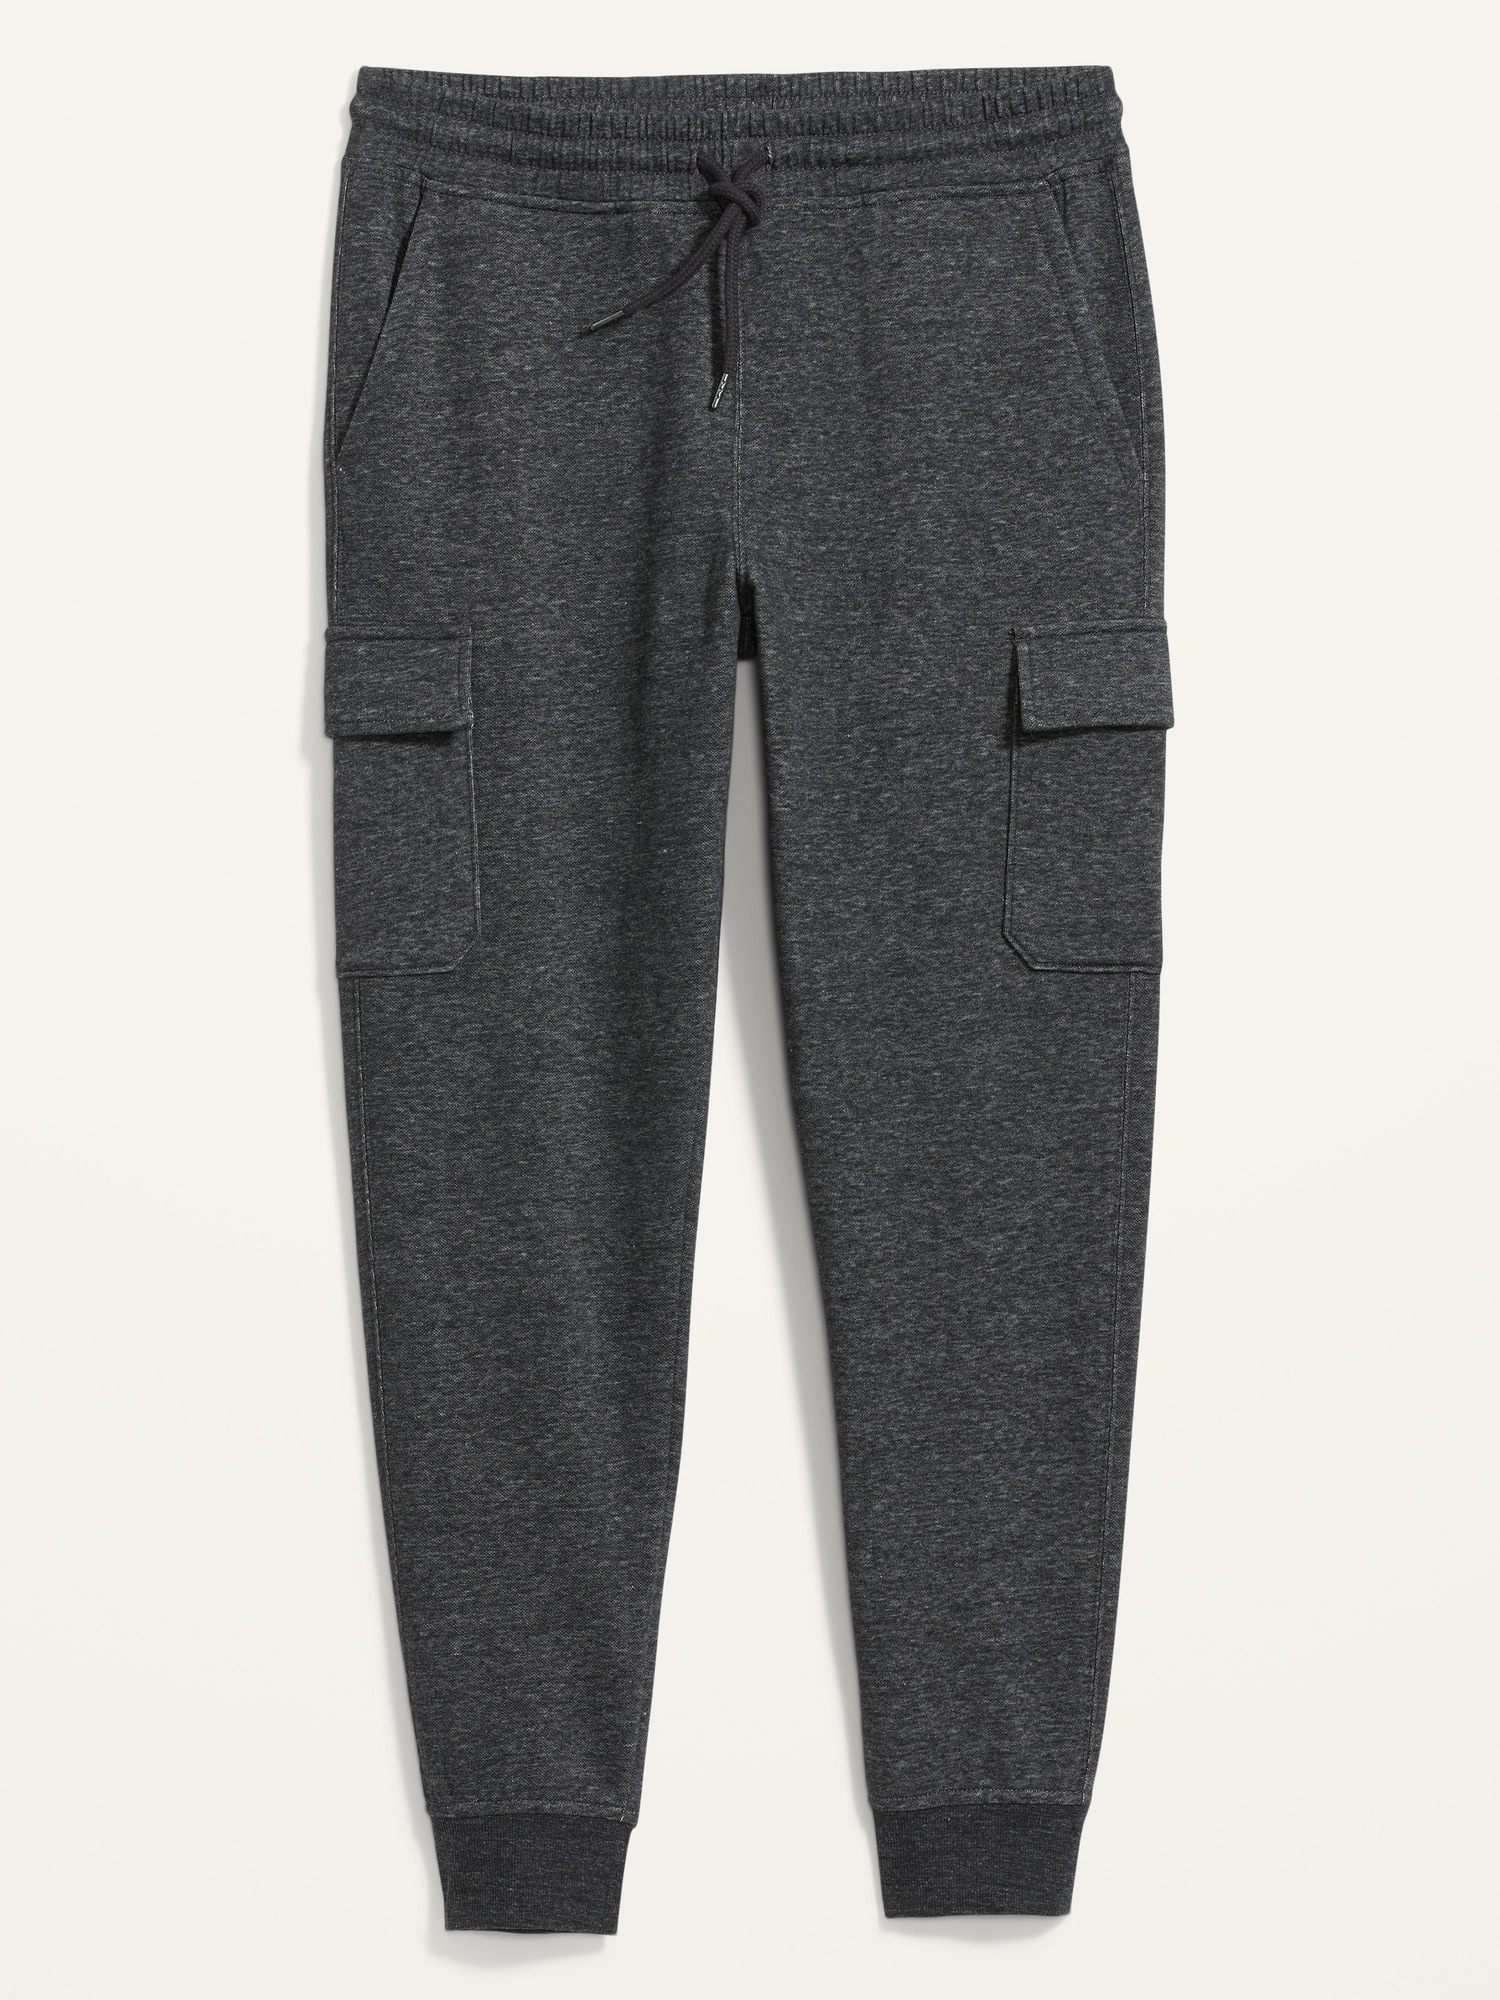 Tapered Street Jogger Cargo Sweatpants for Men | Old Navy